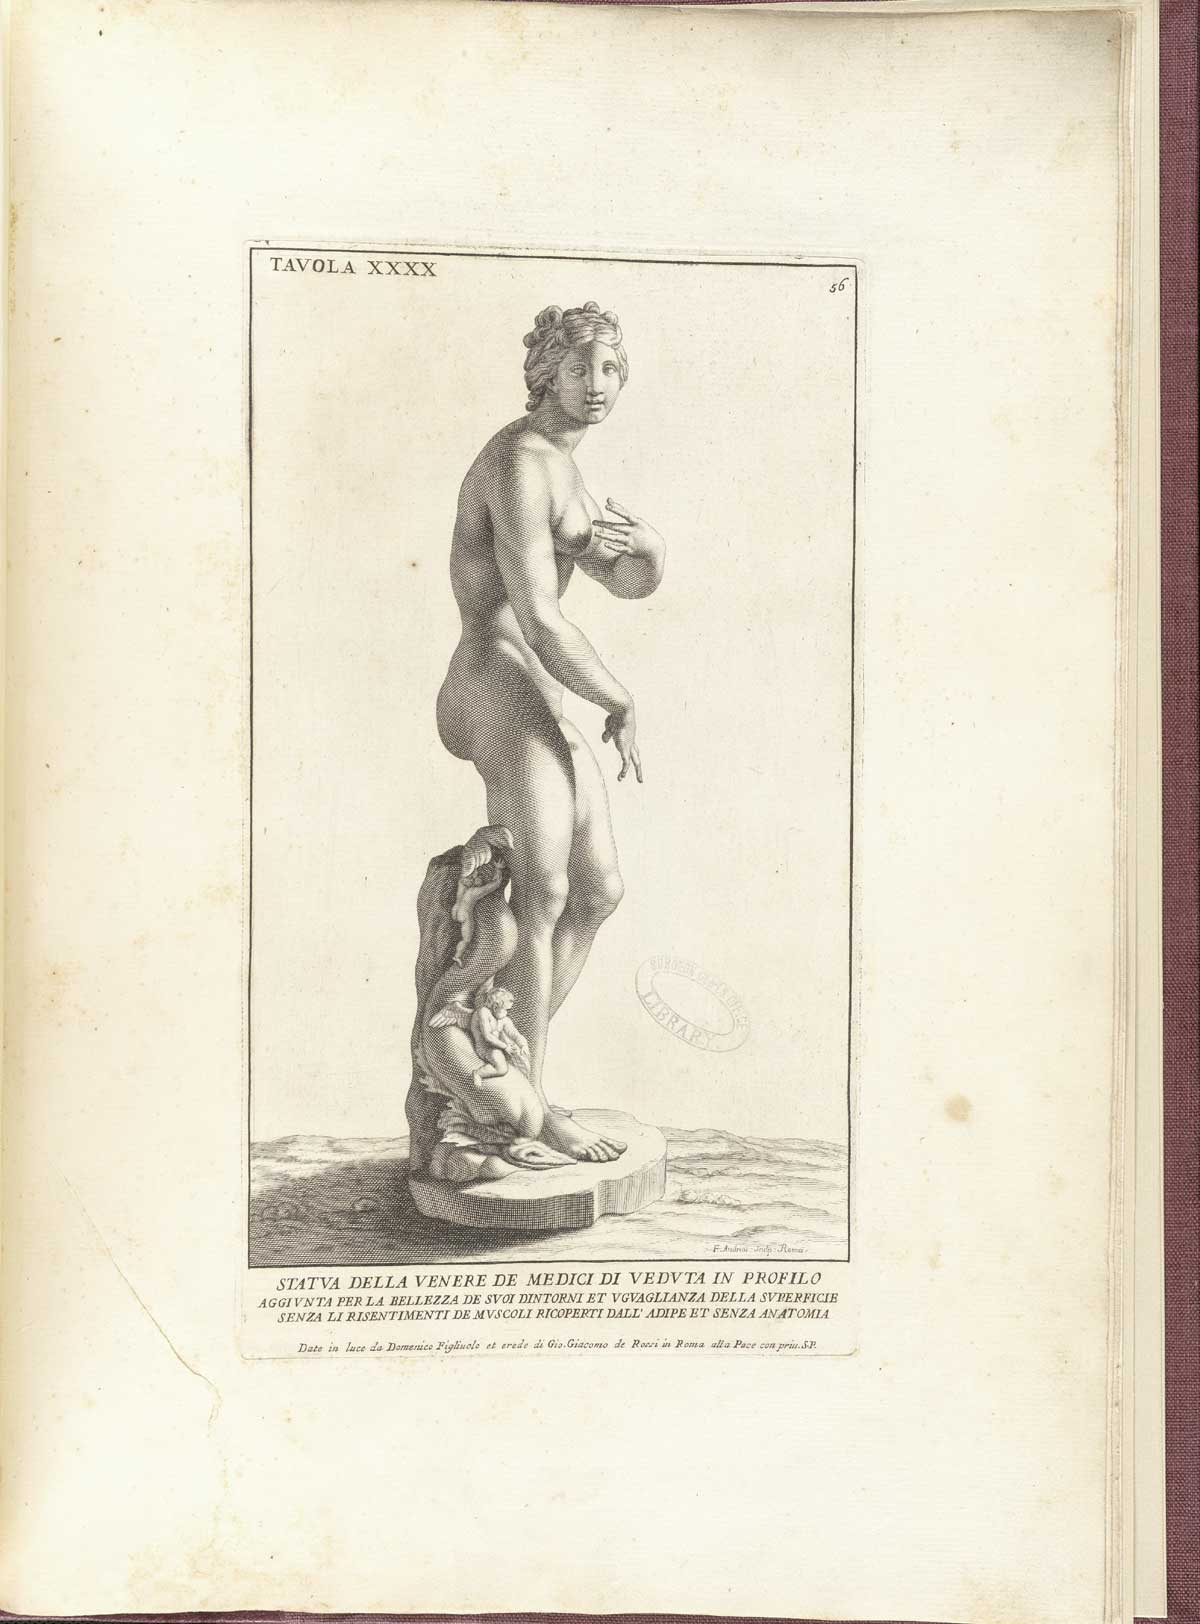 Engraving of a side view of the Medici Venus statue, a standing facing nude woman with her body turned 90 degrees to the right; at her right foot is a tree stump on which sit two cherubs; from Bernardino Genga’s Anatomia per uso et intelligenza del disegno, NLM Call no.: WZ 250 G329an 1691.